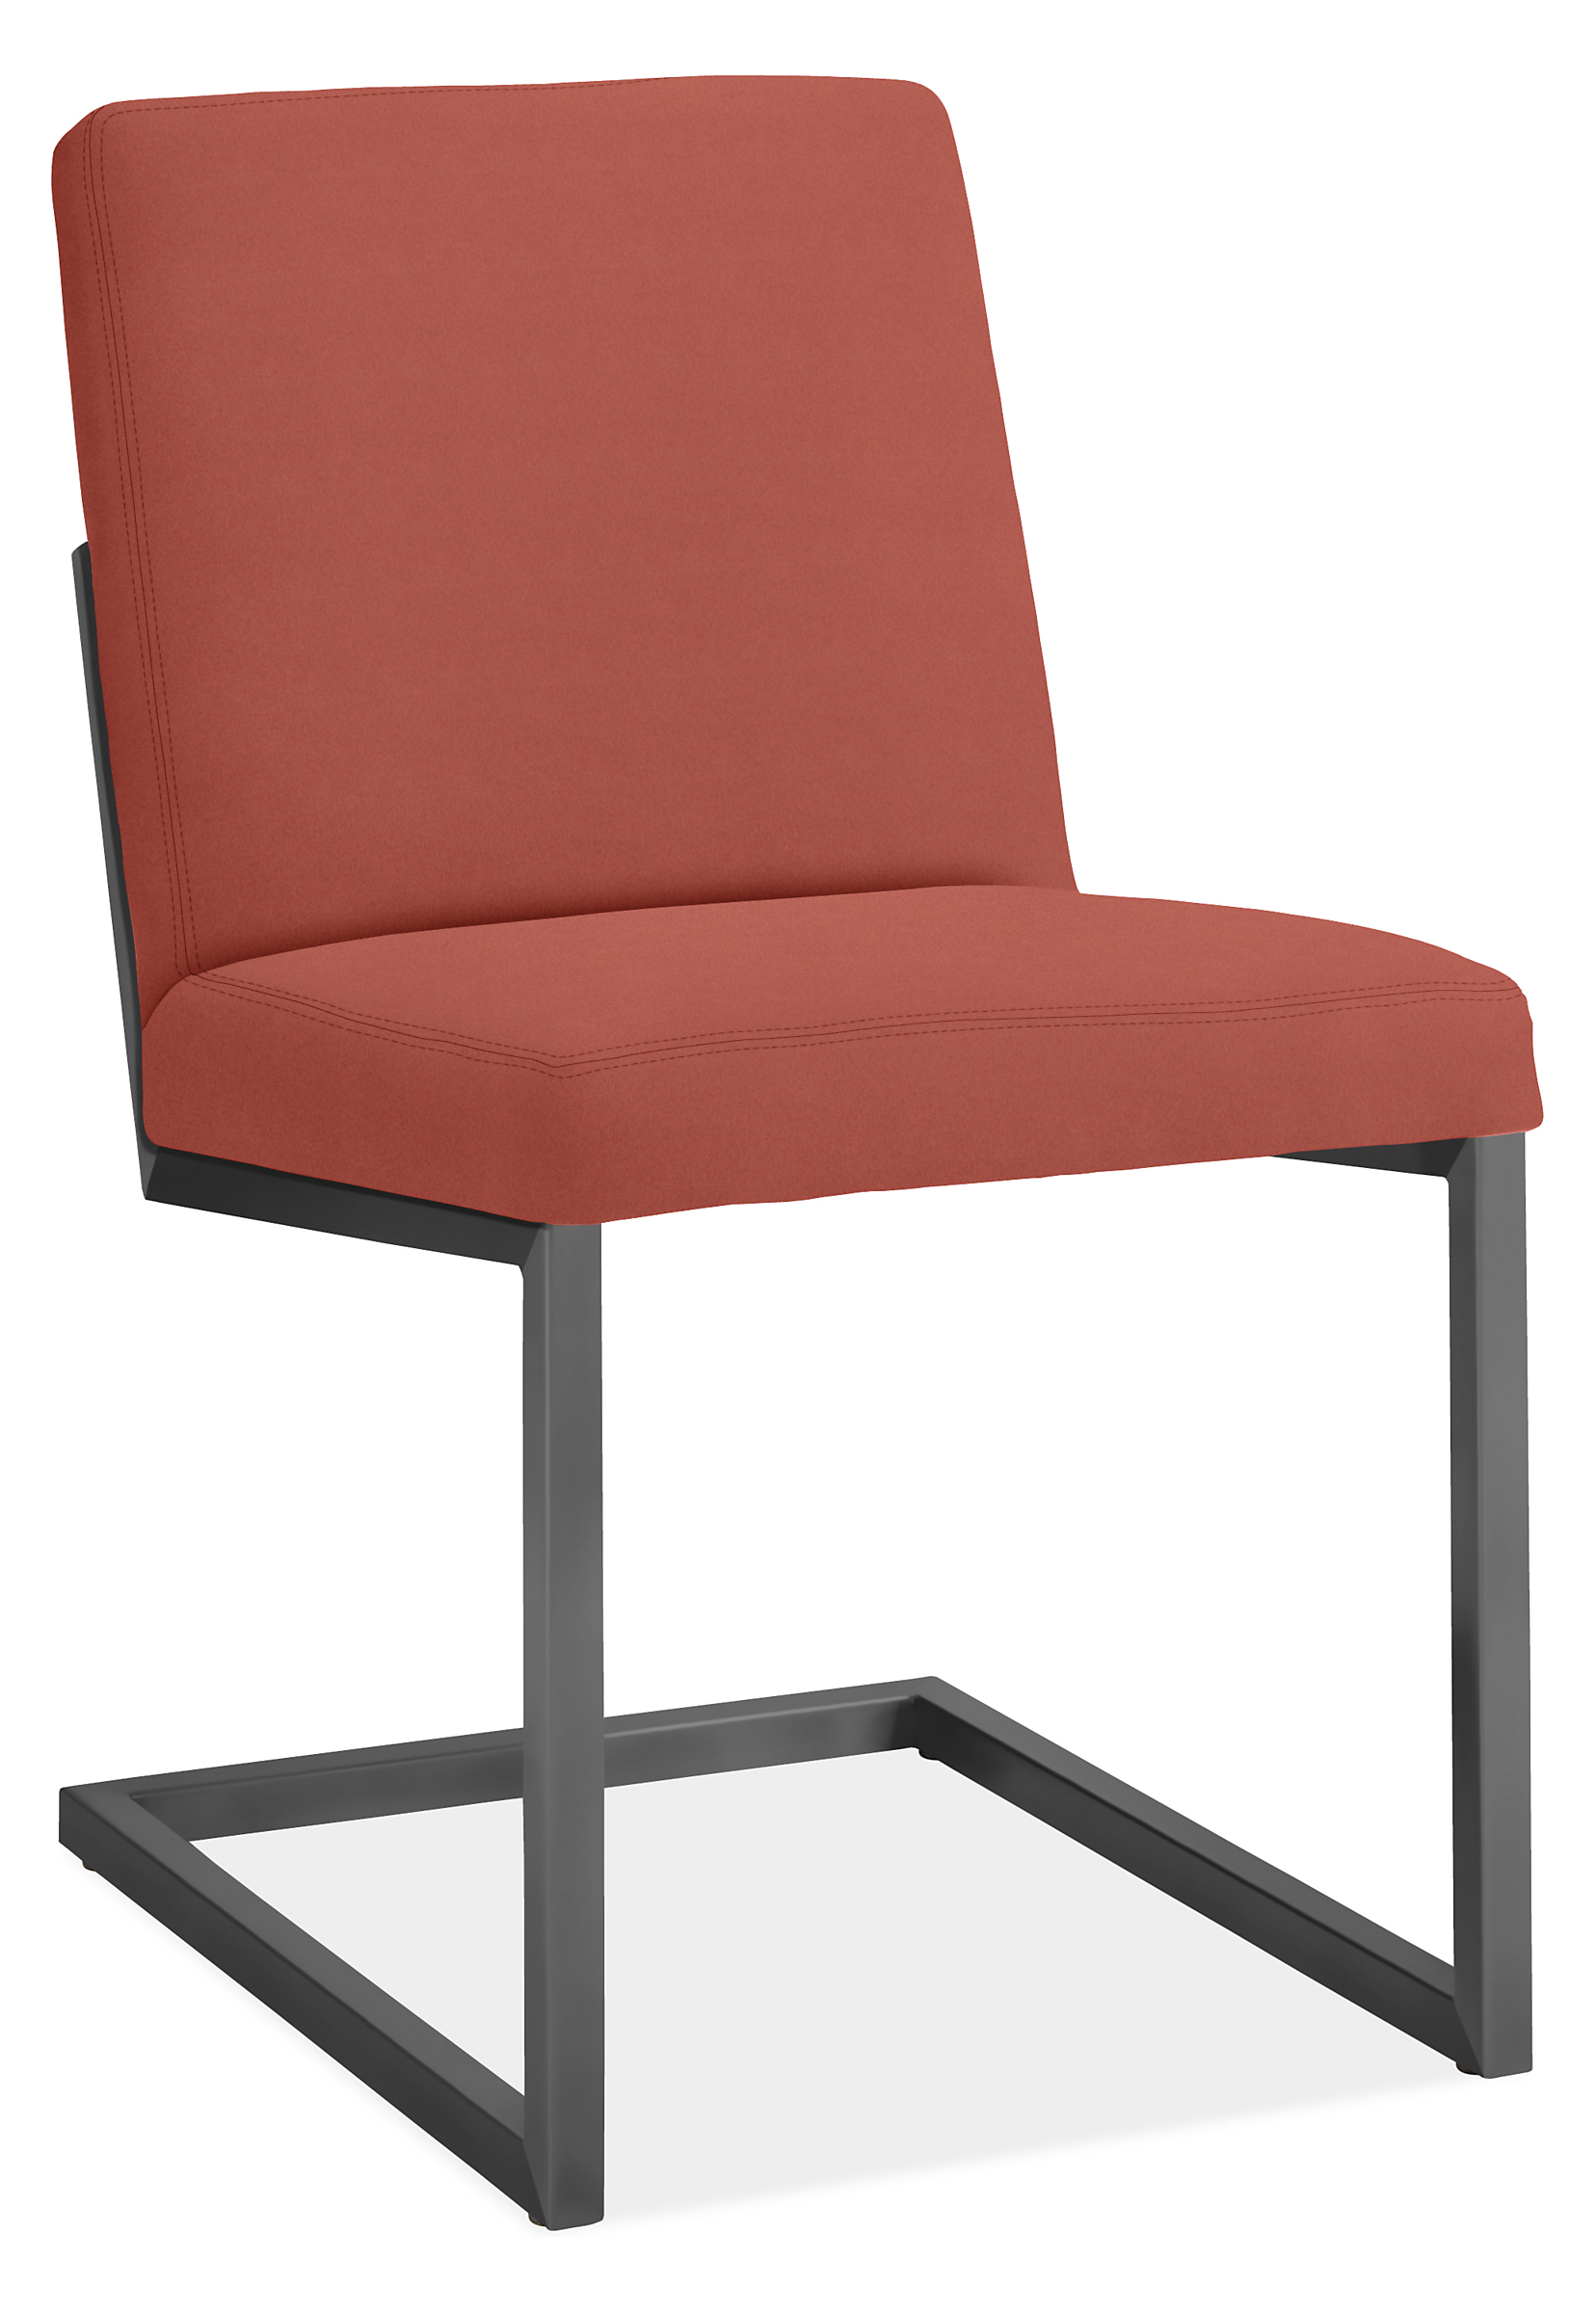 Finn Side Chair in Tristan Coral with Graphite Frame